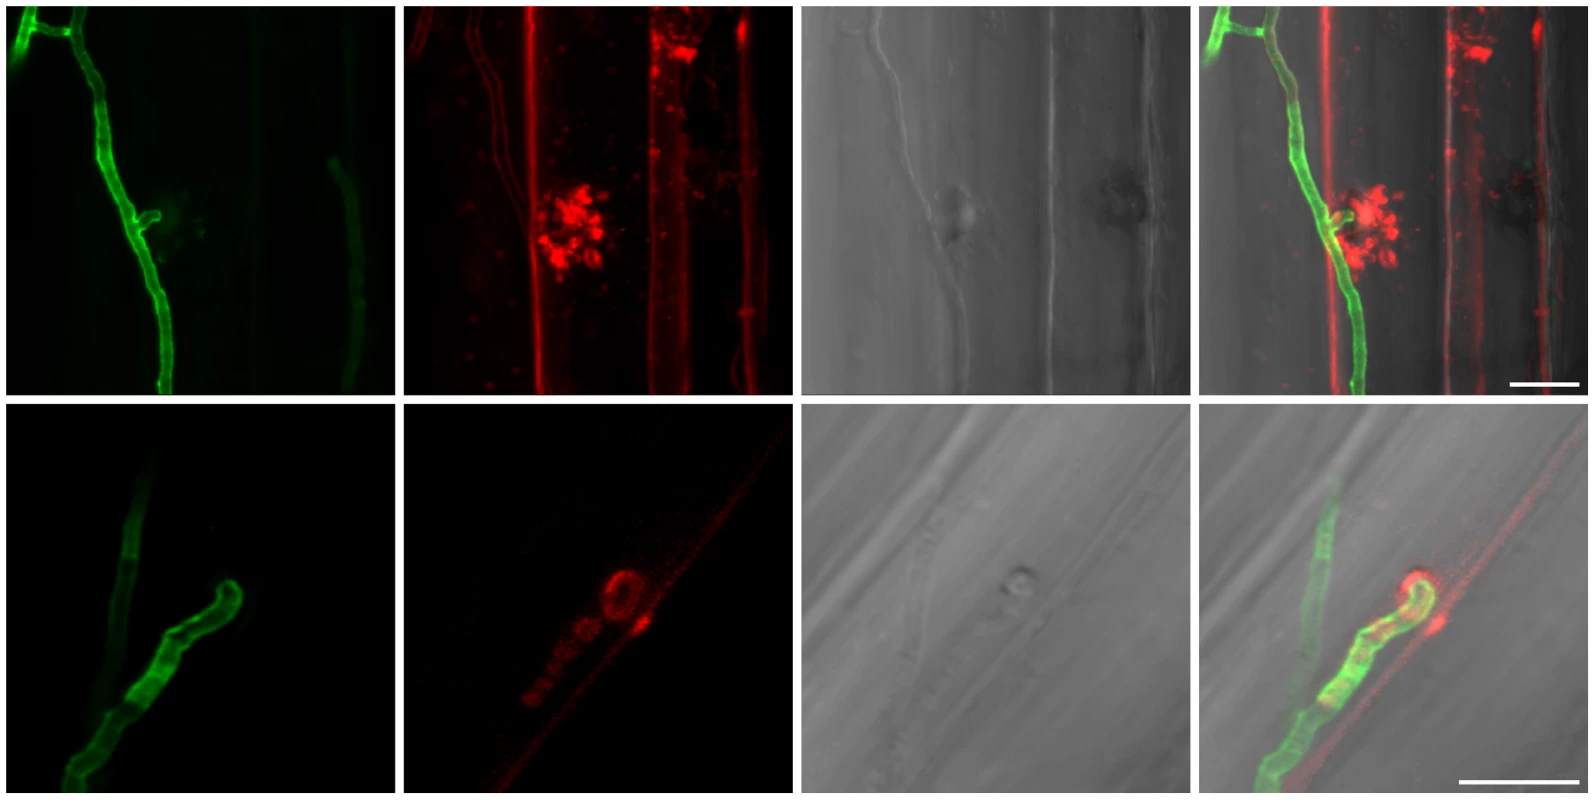 Penetration of hyphae in living root cortex cells.